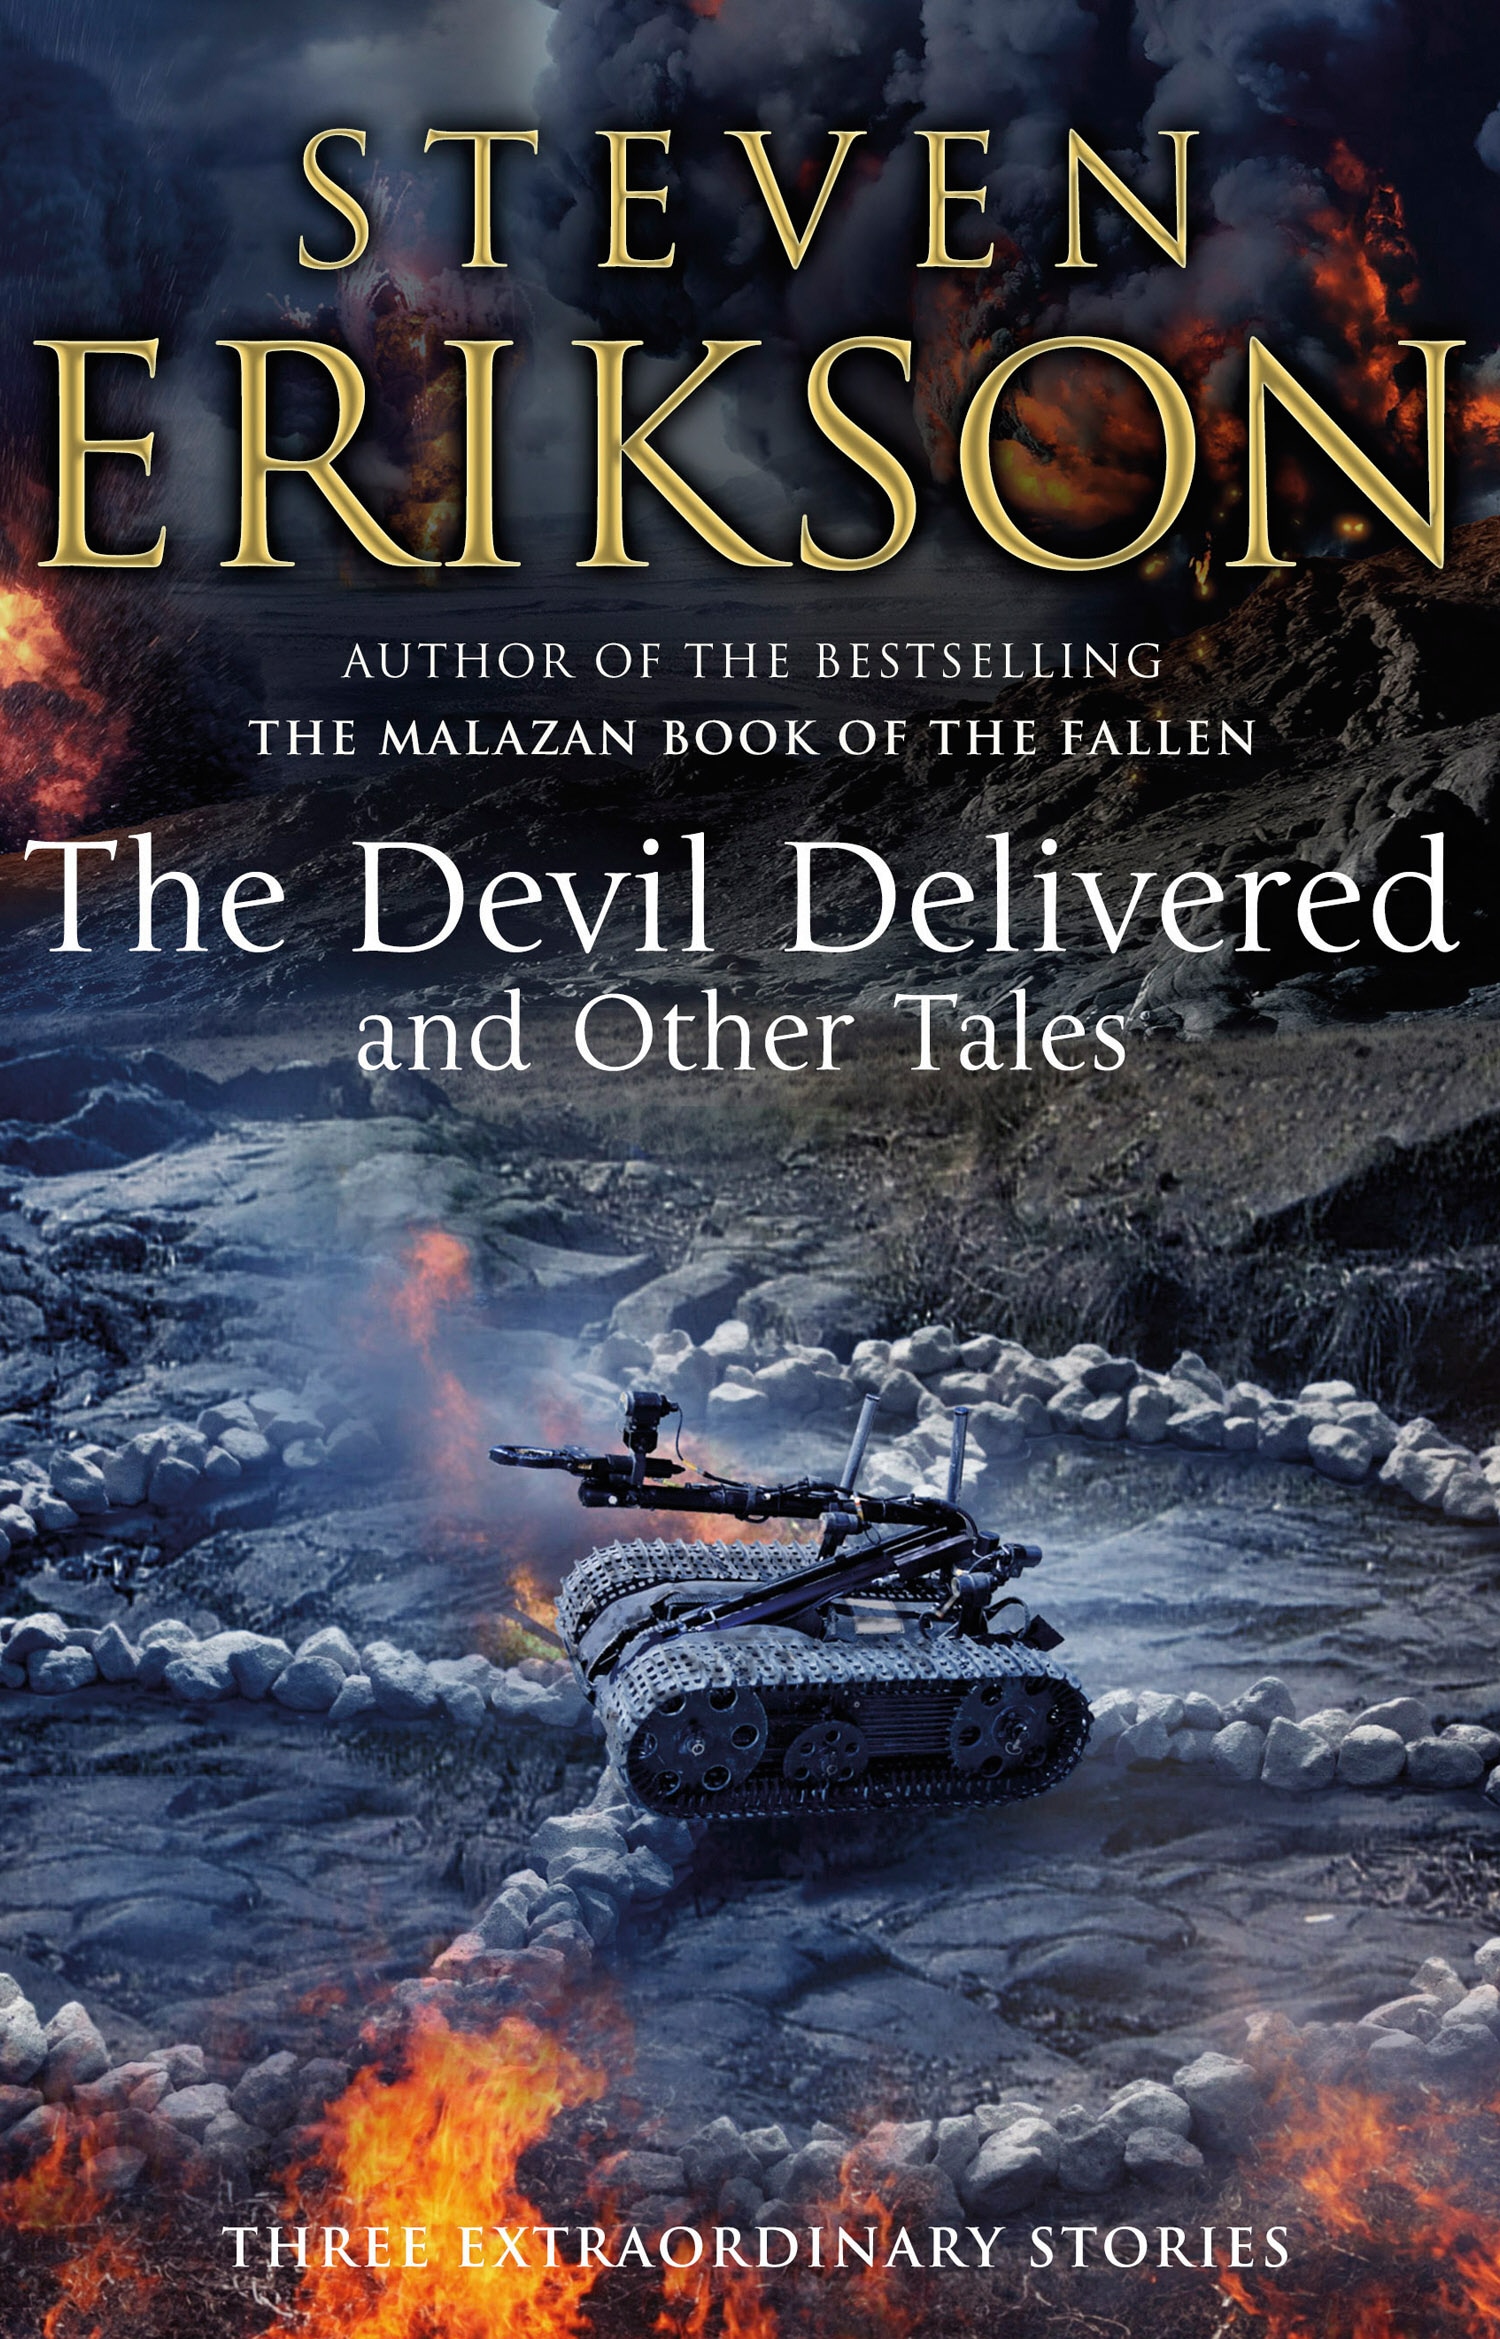 Book “The Devil Delivered and Other Tales” by Steven Erikson